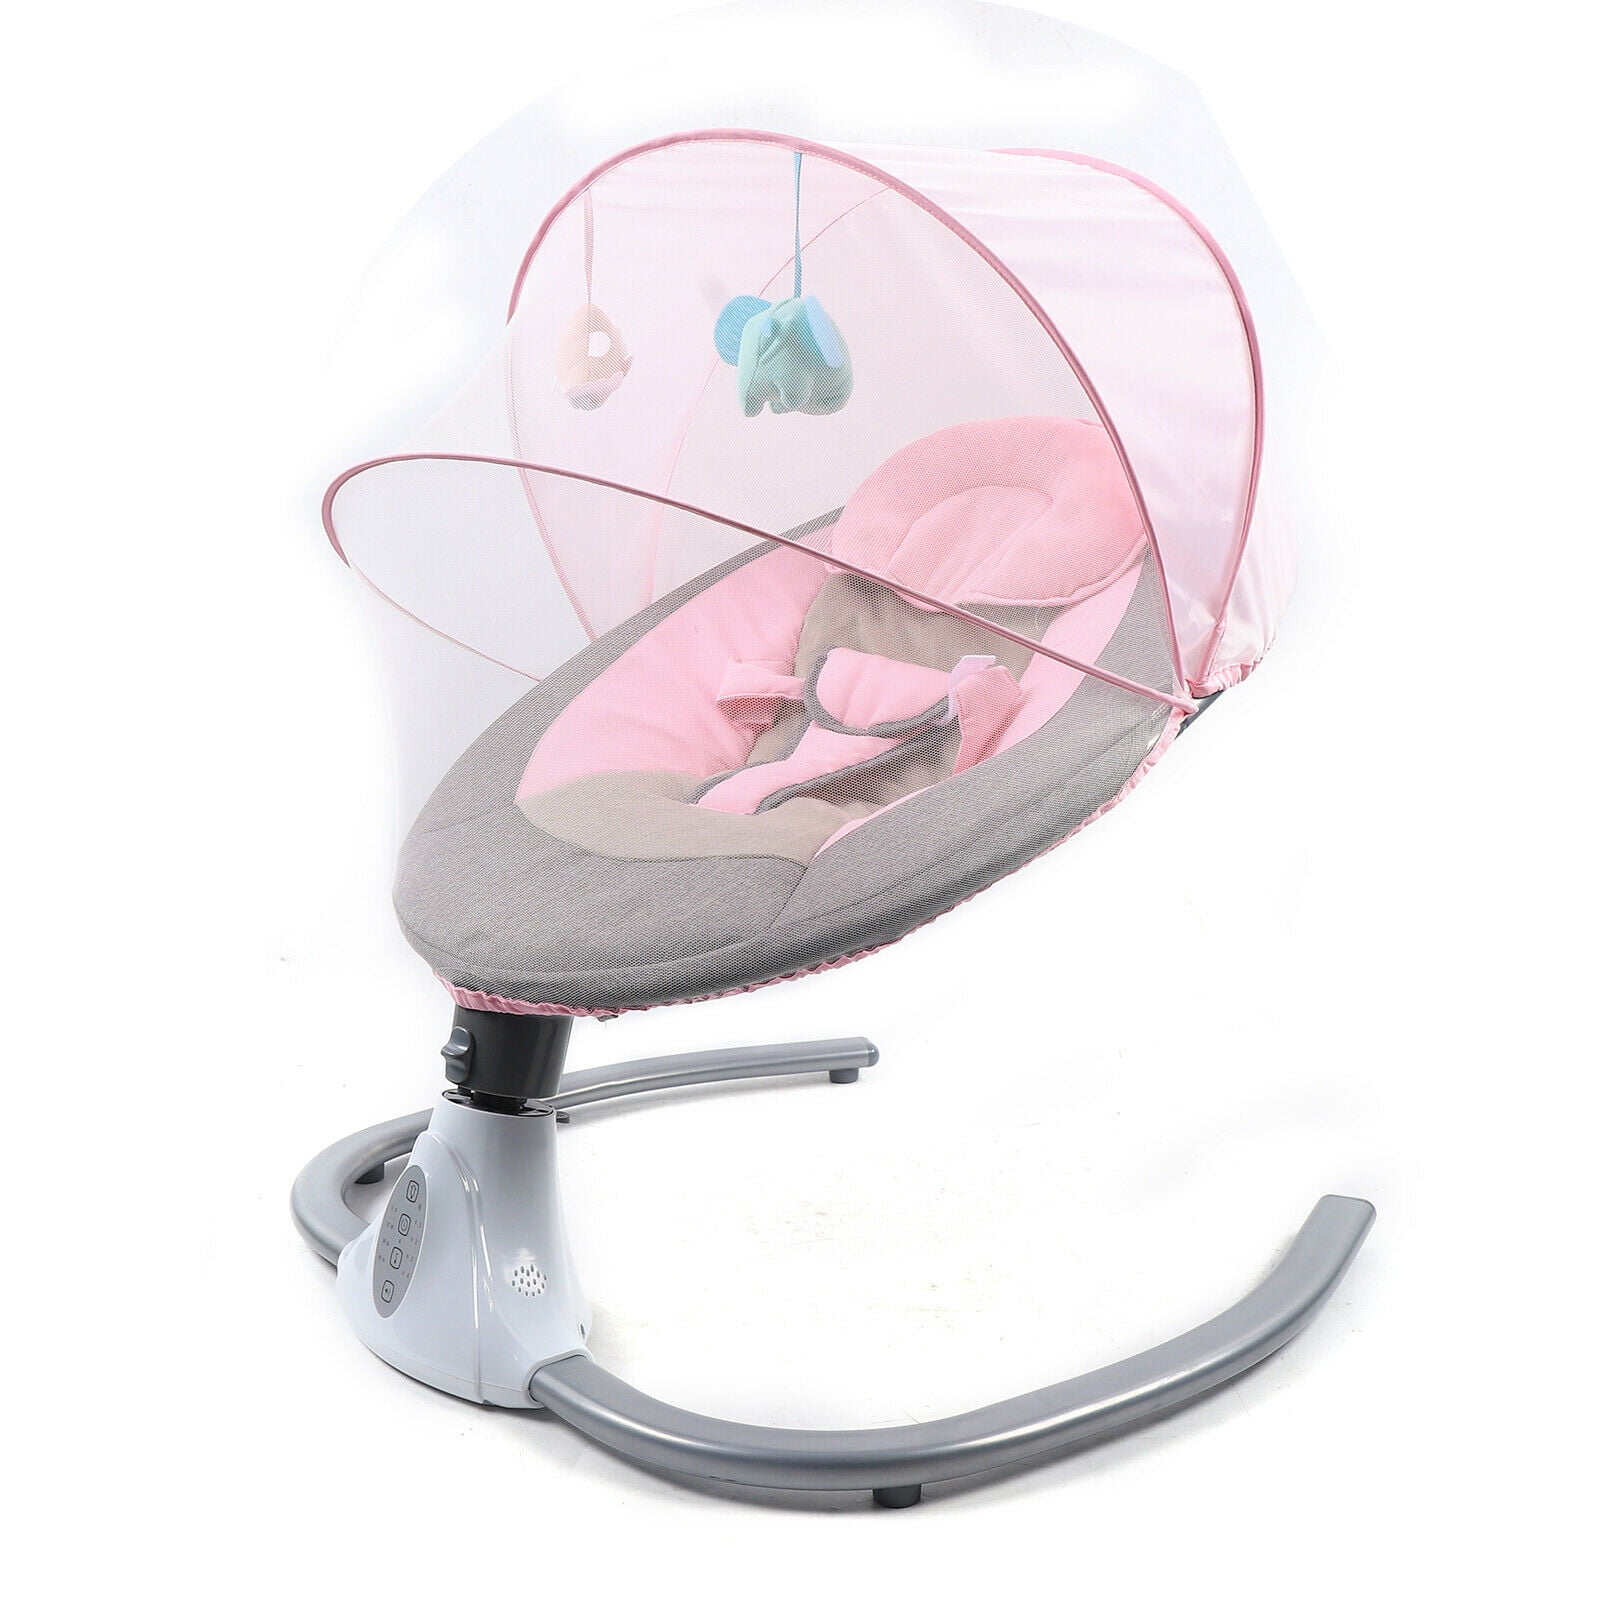 Bluetooth Function Swing Chair Baby Bouncer with Music and Toys Cradle Rocker Seat Bouncy Rocking for 0-12 Months Newborn Babies Pink 